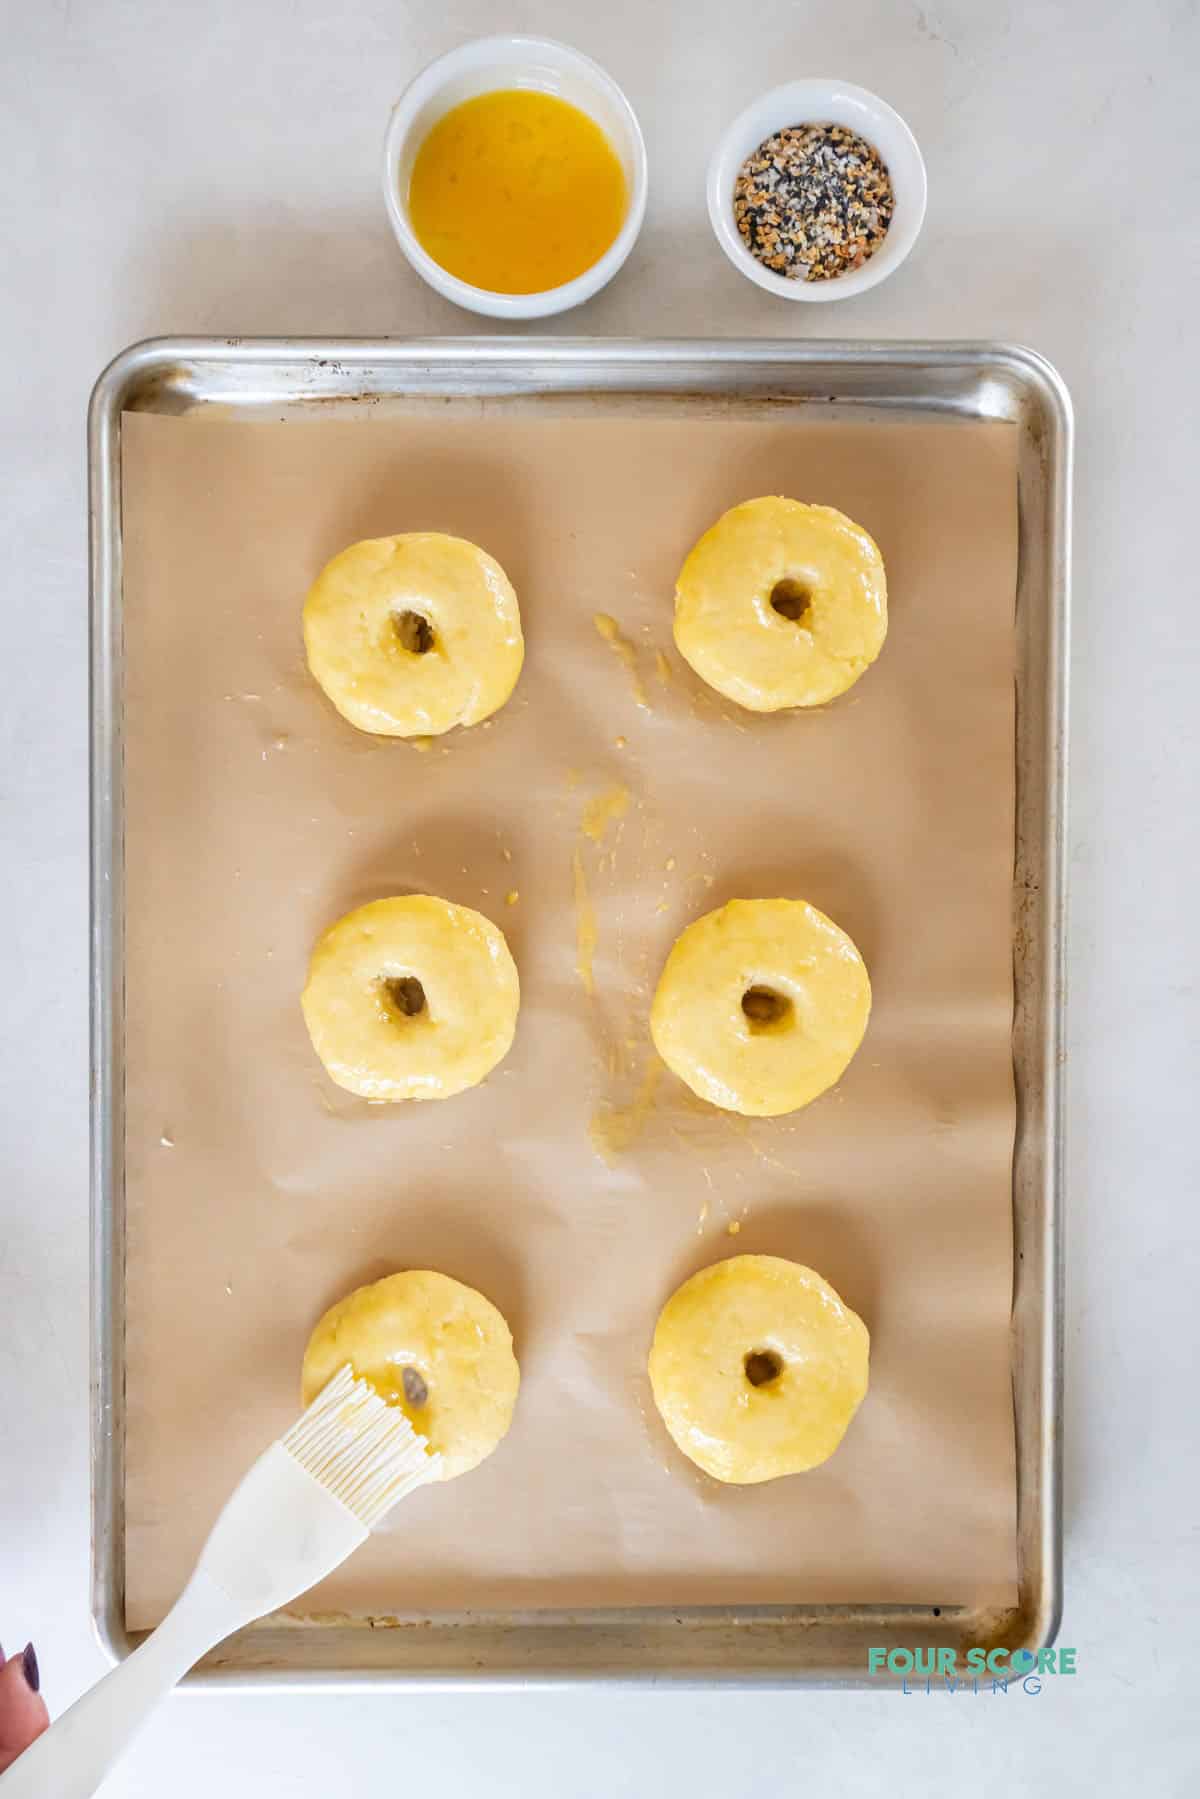 6 uncooked keto bagels on a tray. A silicone brush adds egg wash to them. A bowl of egg wash and a bowl of bagel seasoning are next to the pan.